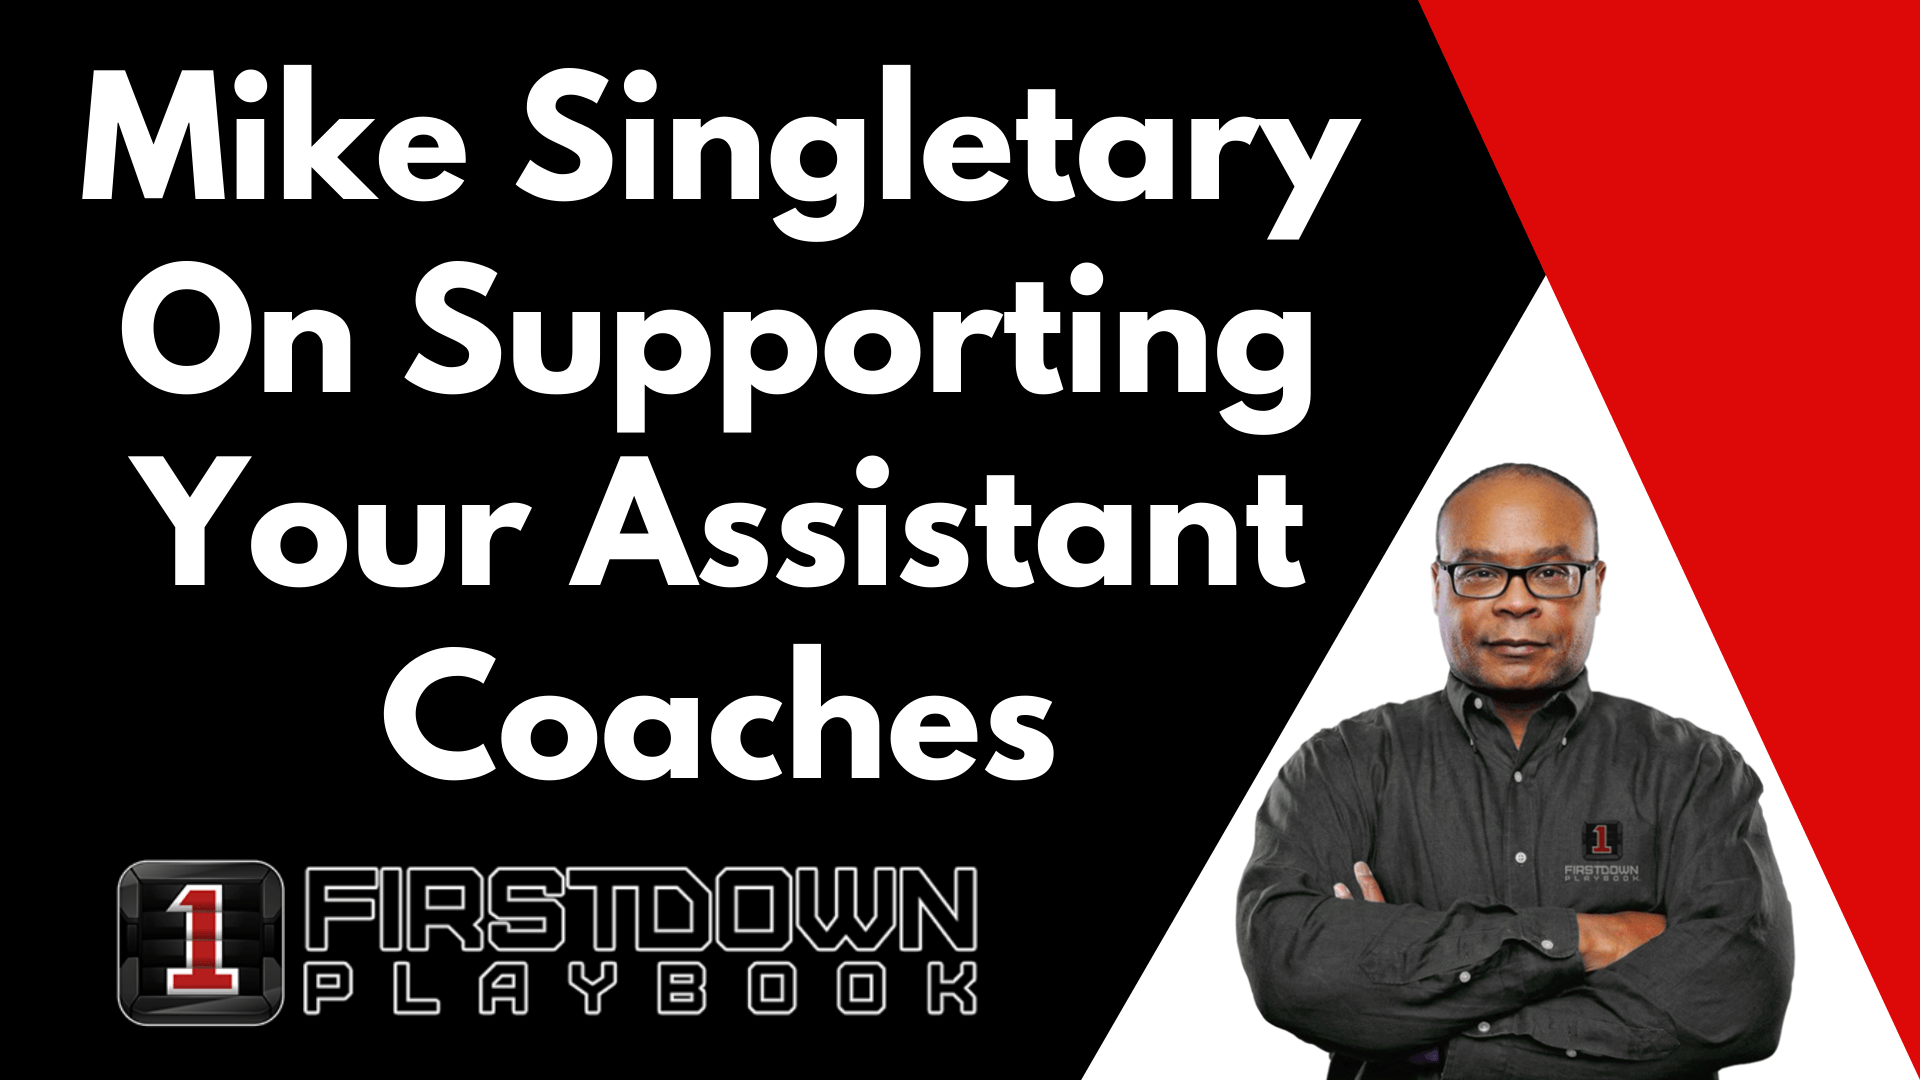 Singletary On Supporting Your Assistant Coaches